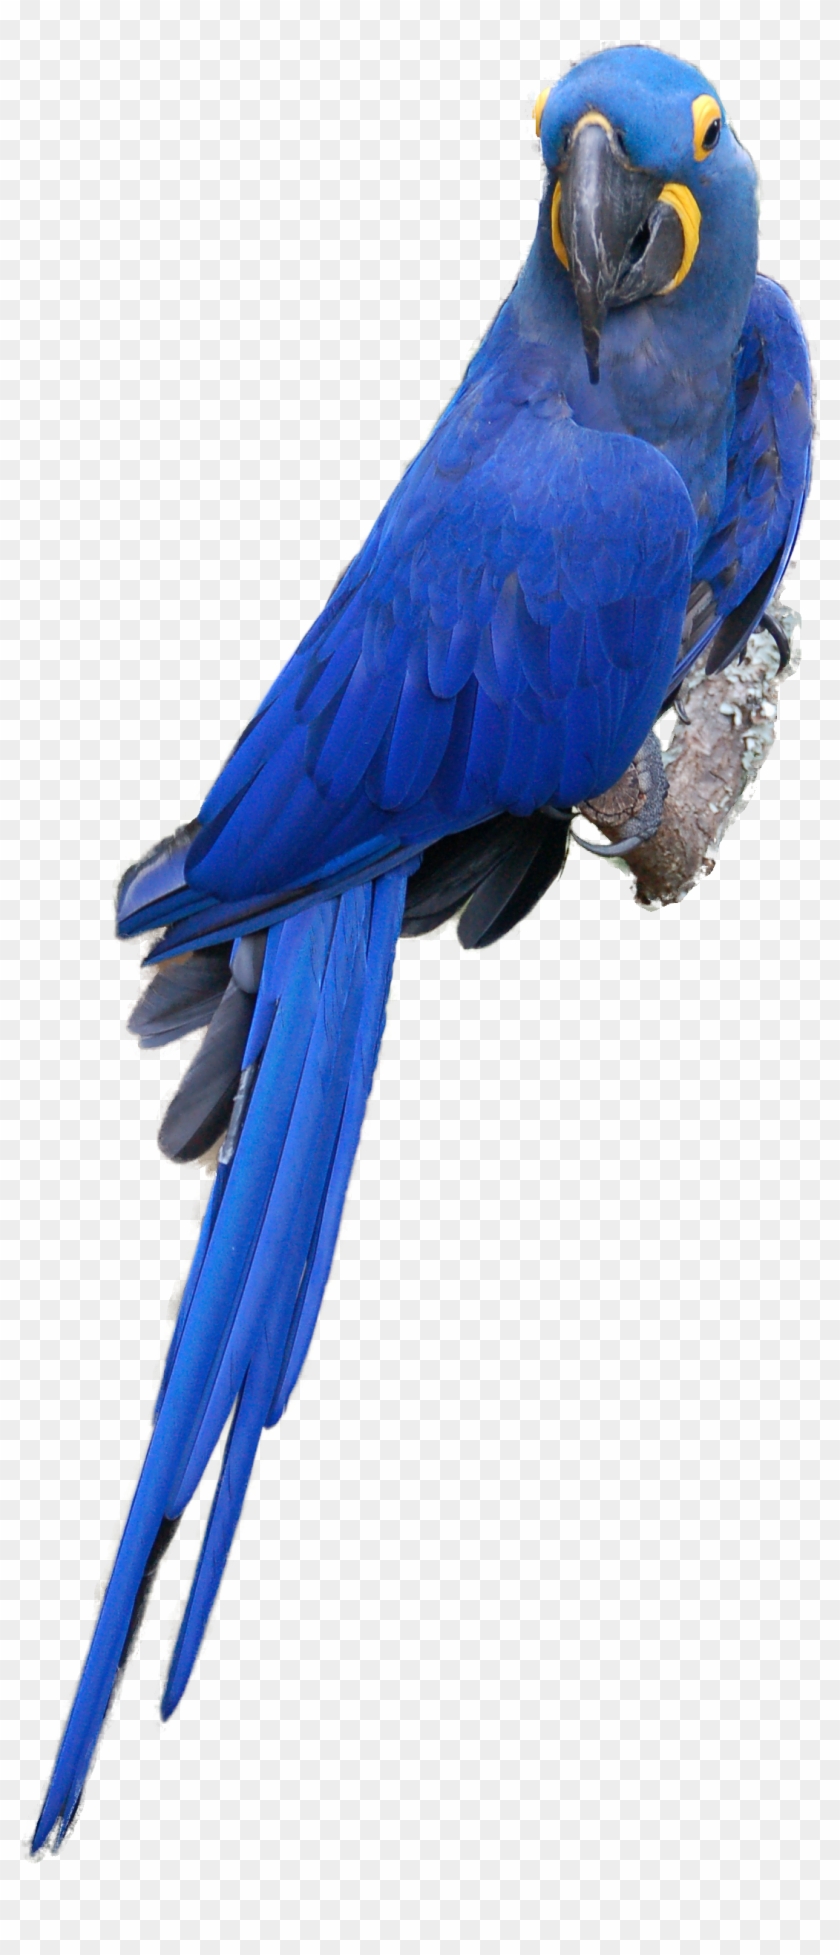 Scarlet Macaw Clipart Blue Macaw - Blue Ara Parrot Png #468875